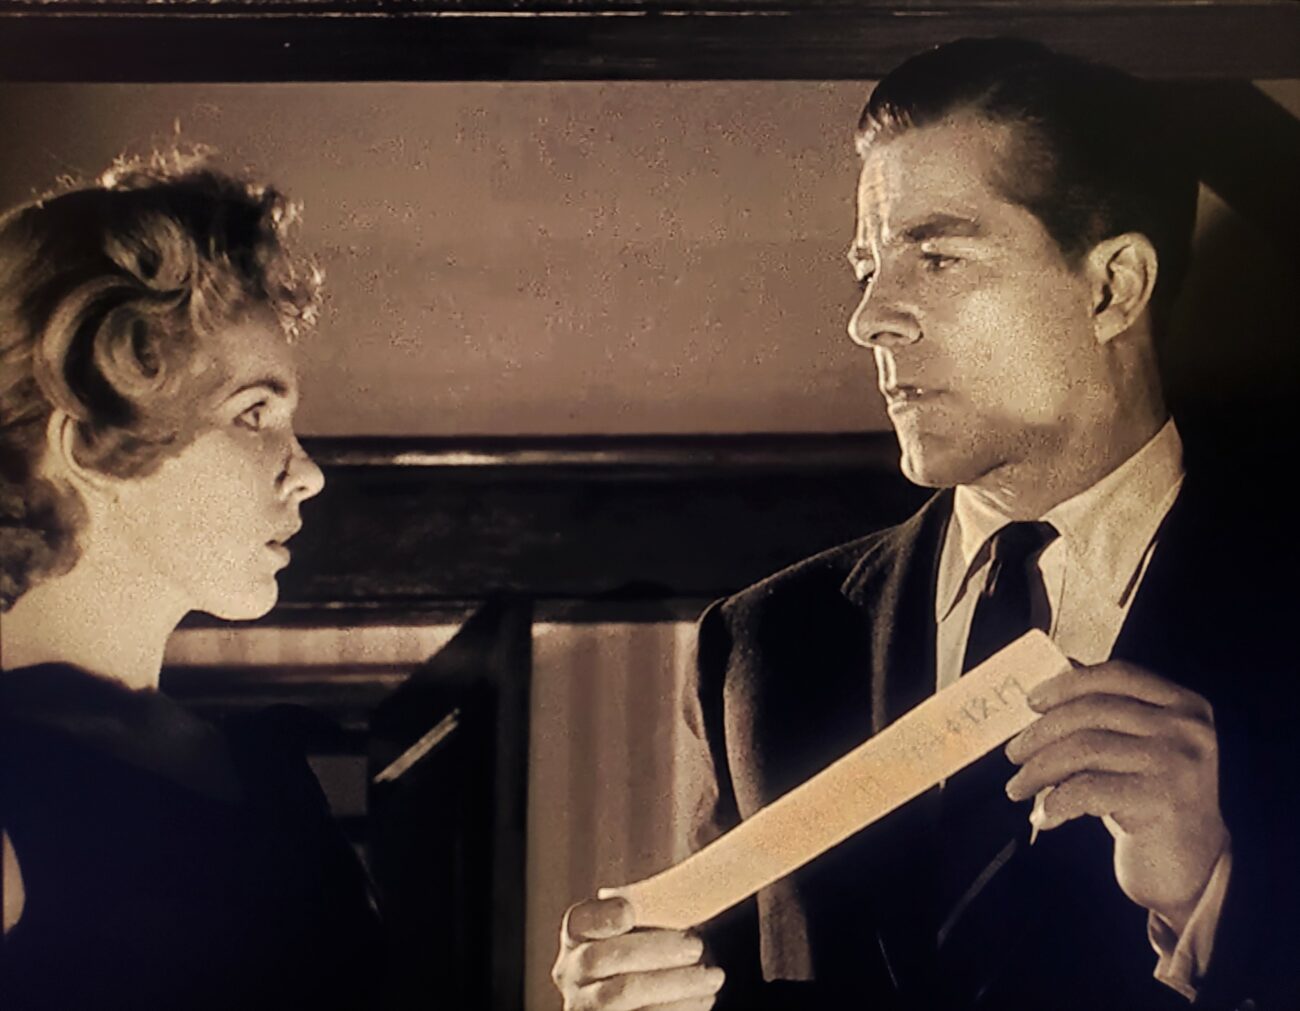 Performers Peggy Cummins and Dana Andrews reading the parchment slip containing the titular curse in Curse of the Demon